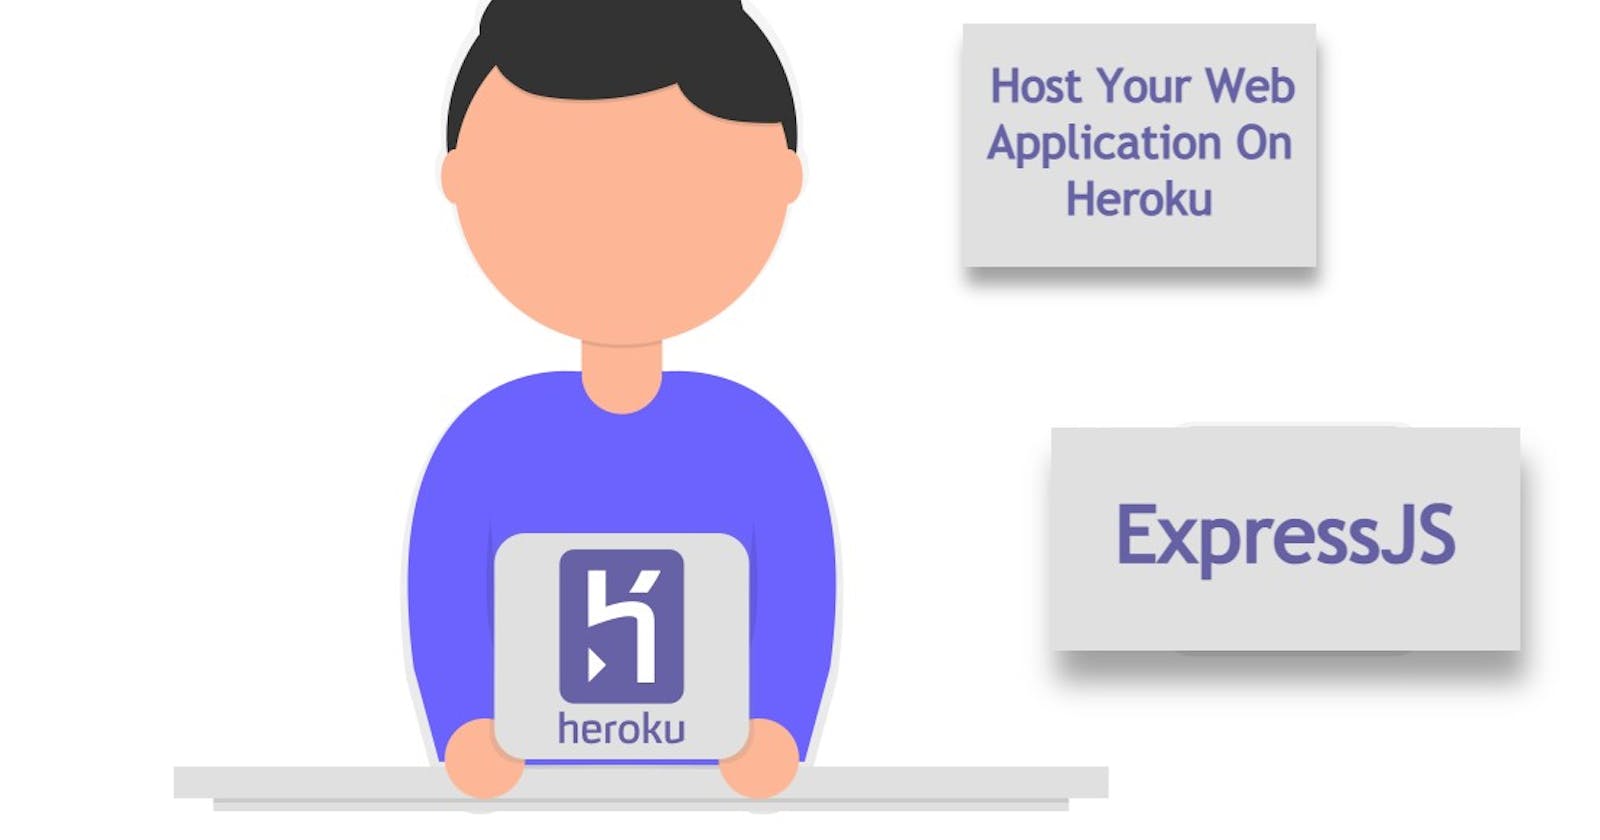 How To Host Express.js Application On Heroku